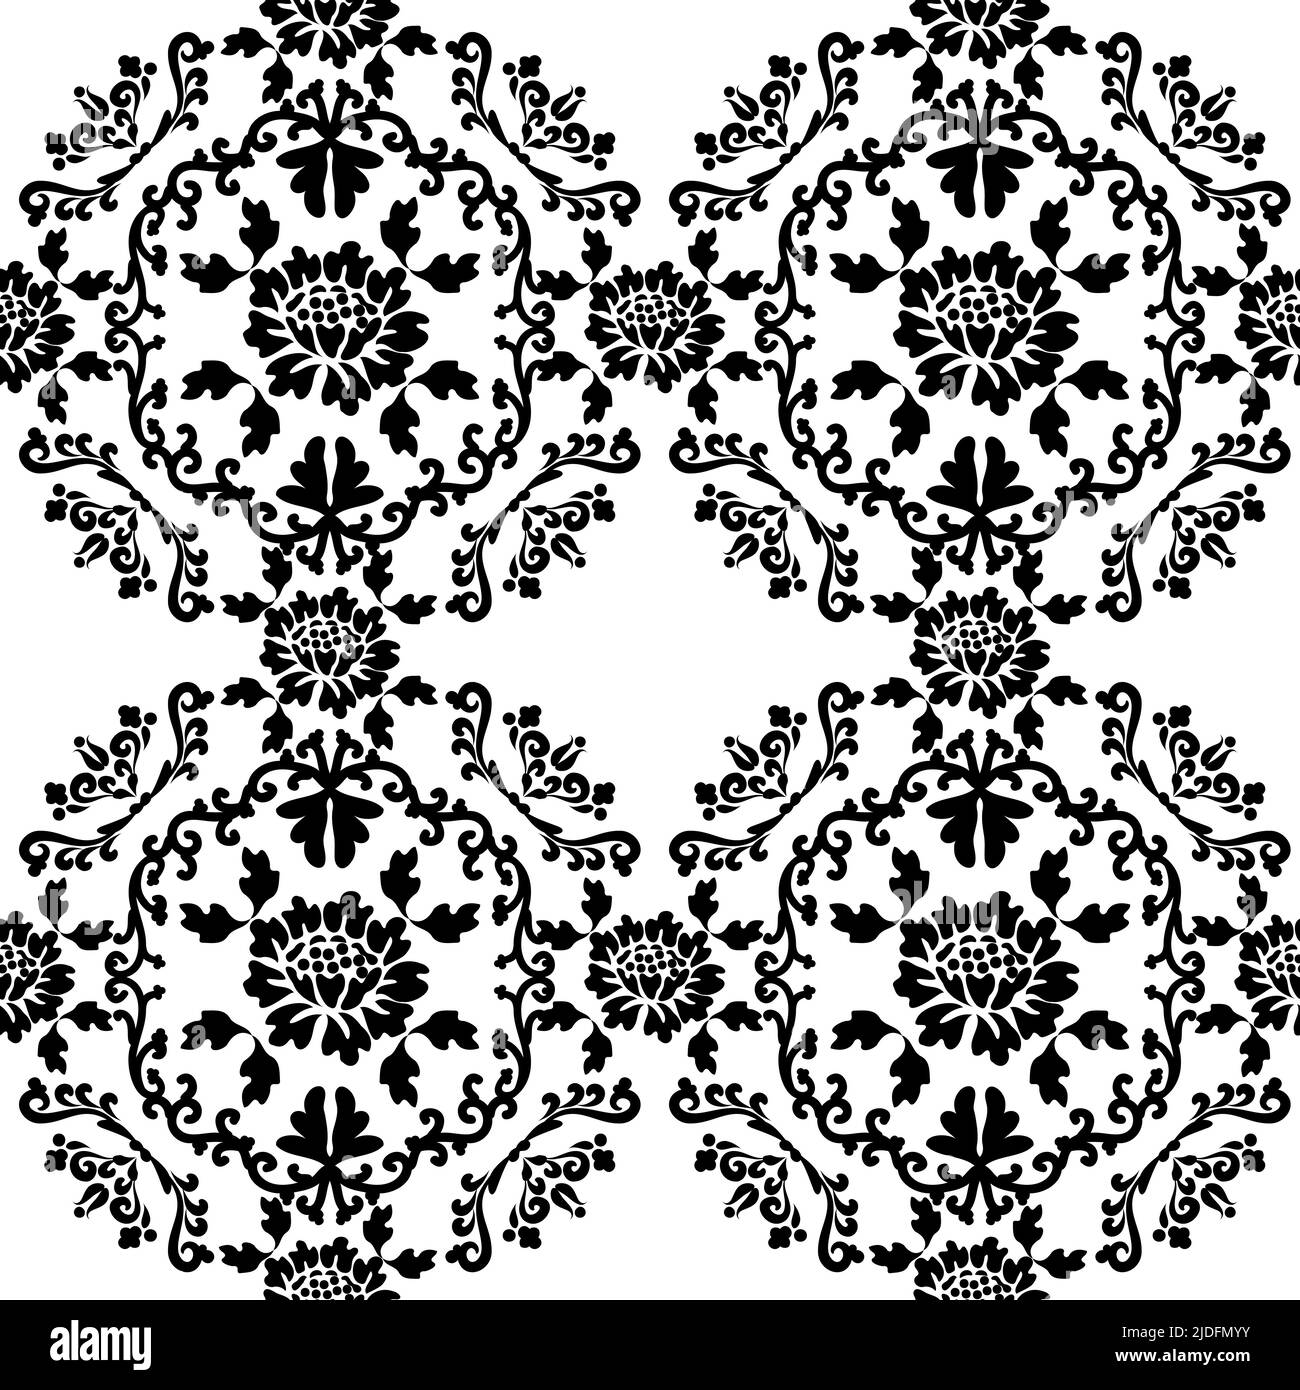 Seamless old fashioned floral pattern. Vector victorian ornament with flowers for fabric design, ceramic tile or wallpaper. Stock Vector